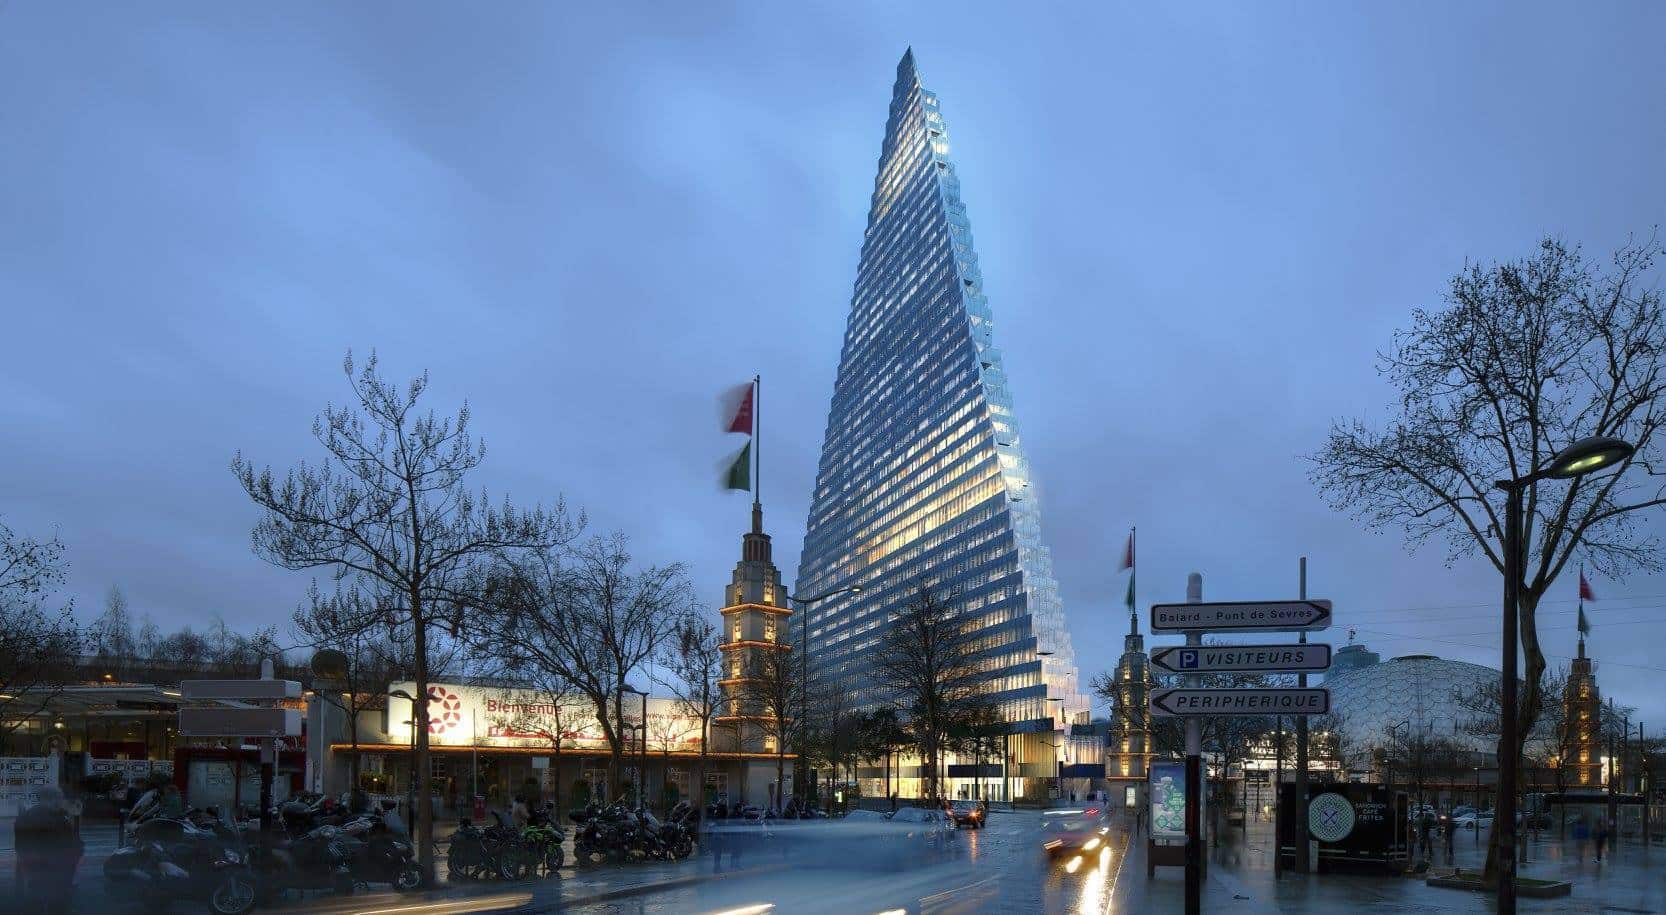 Tour Triangle Is The First Skyscraper in Paris In over 40 Years